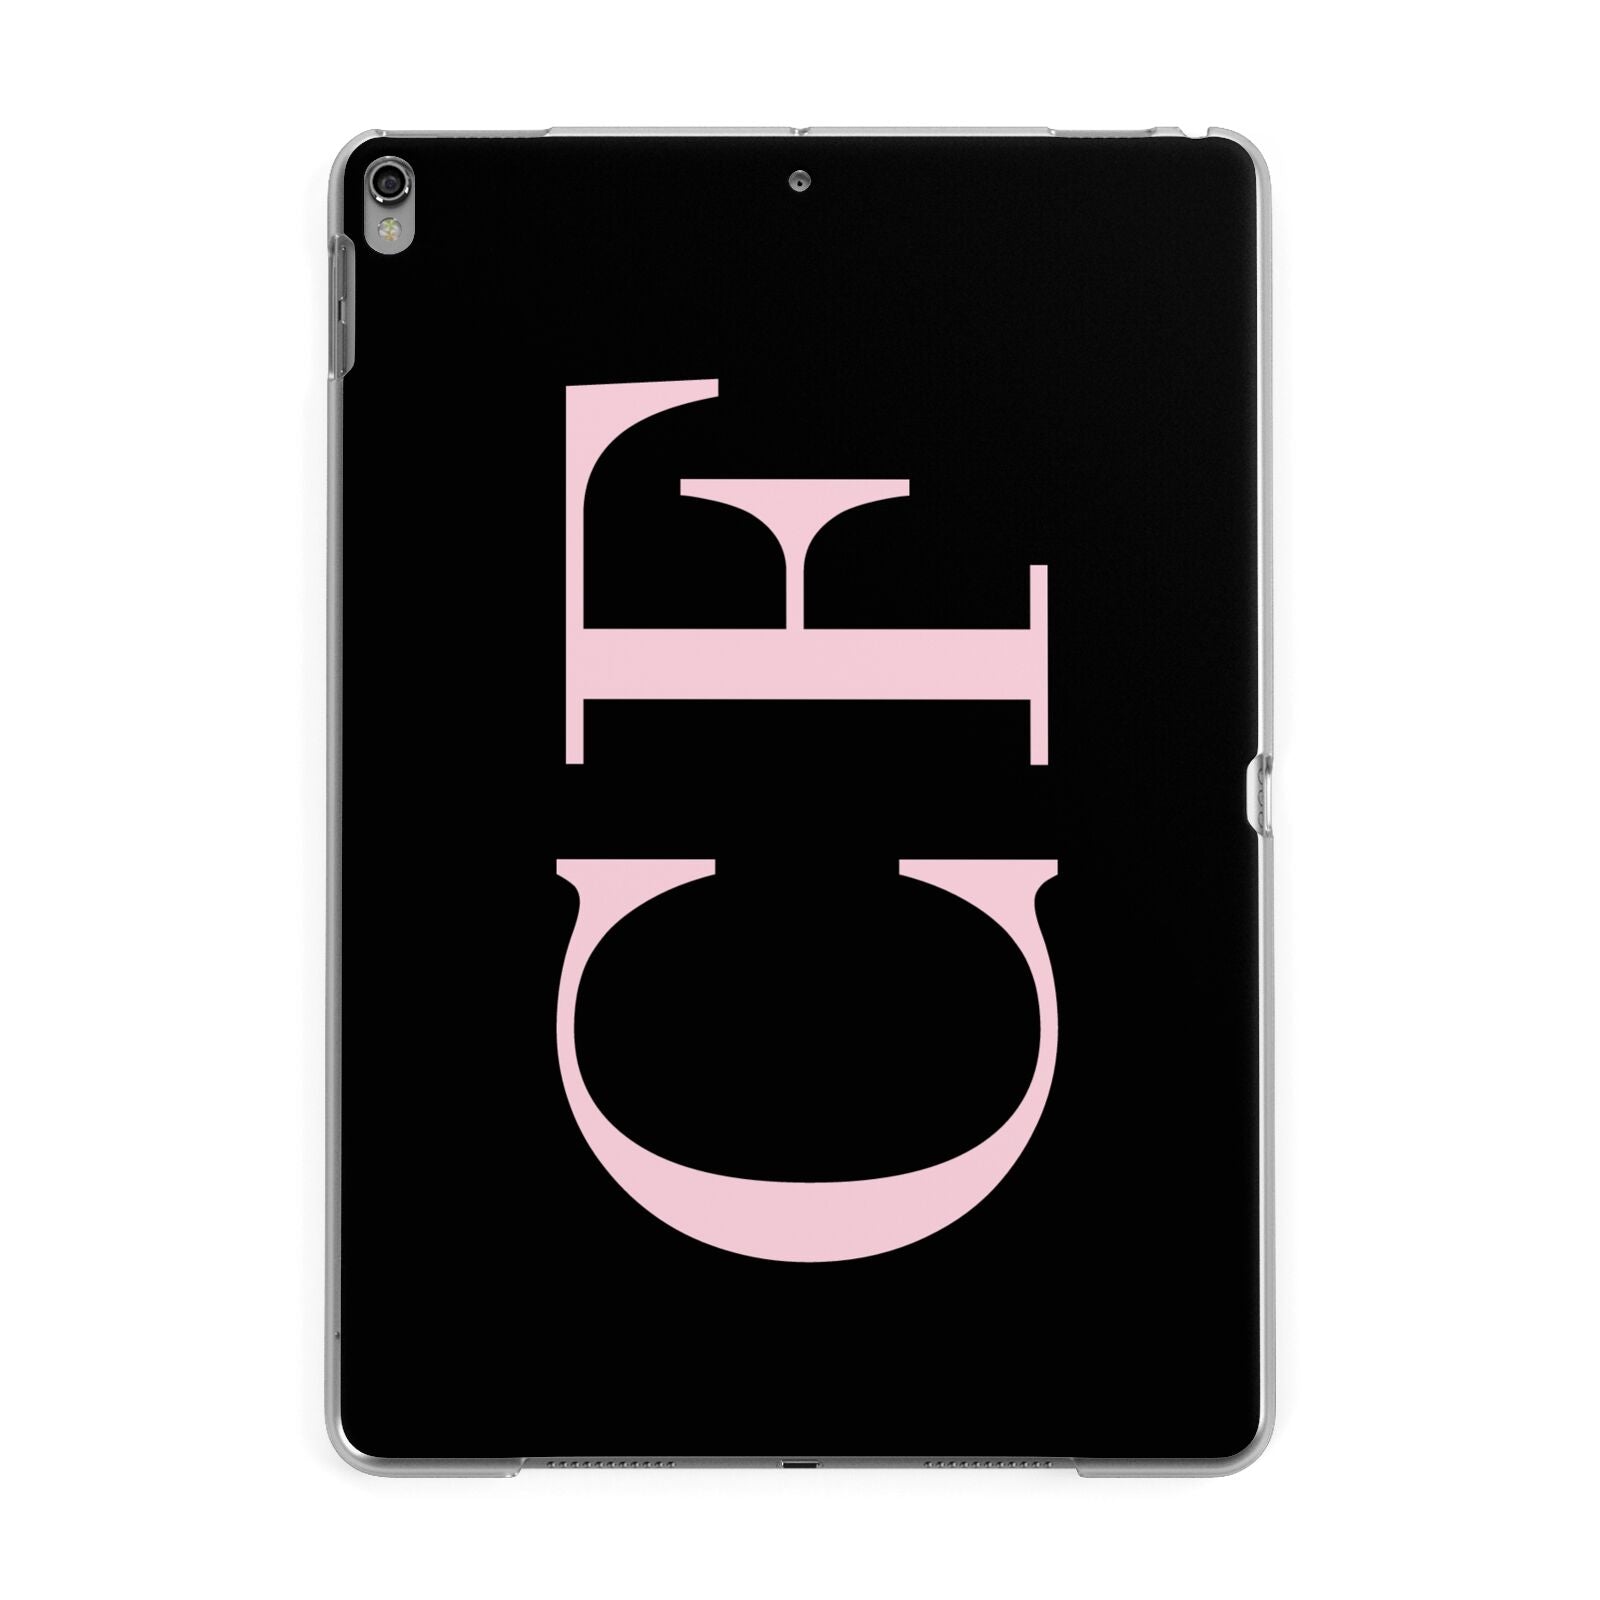 Black with Large Pink Initials Personalised Apple iPad Grey Case